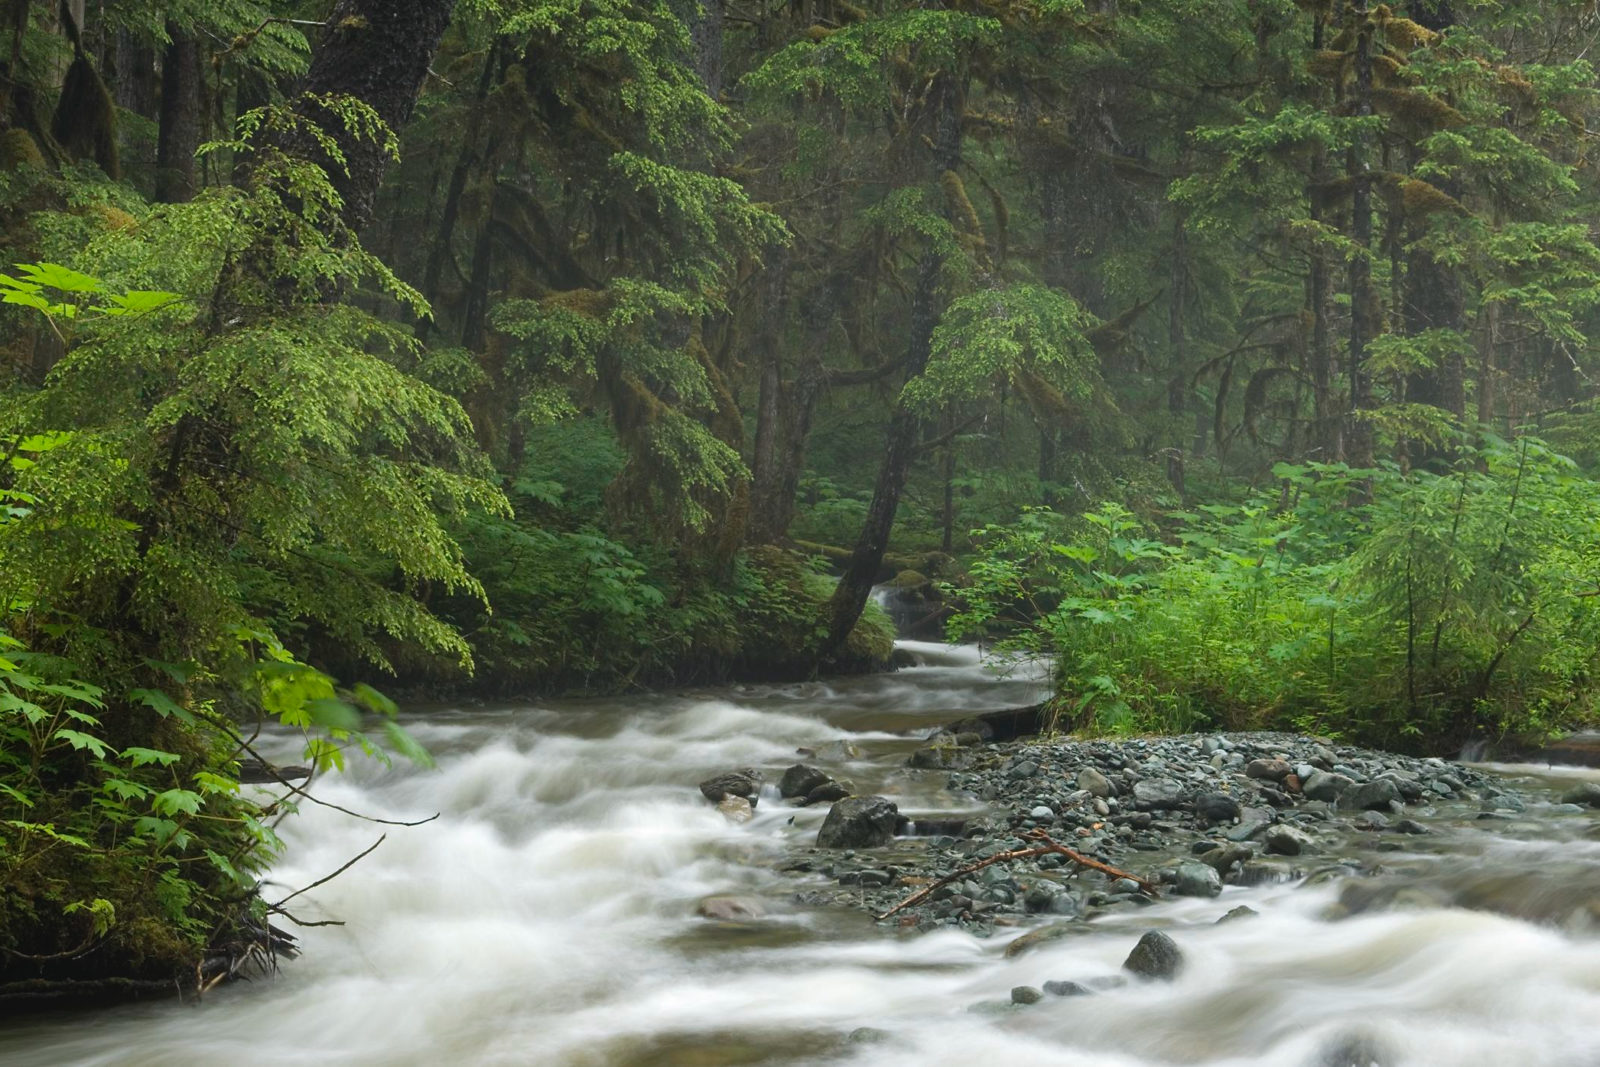 Rainforest
Fish Creek
Douglas Island
Tongass National Forest
Alaska
U.S.A.
Caption: The Tongass National Forest comprises nearly one-third of the world's remaining old-growth coastal temperate rain forests.